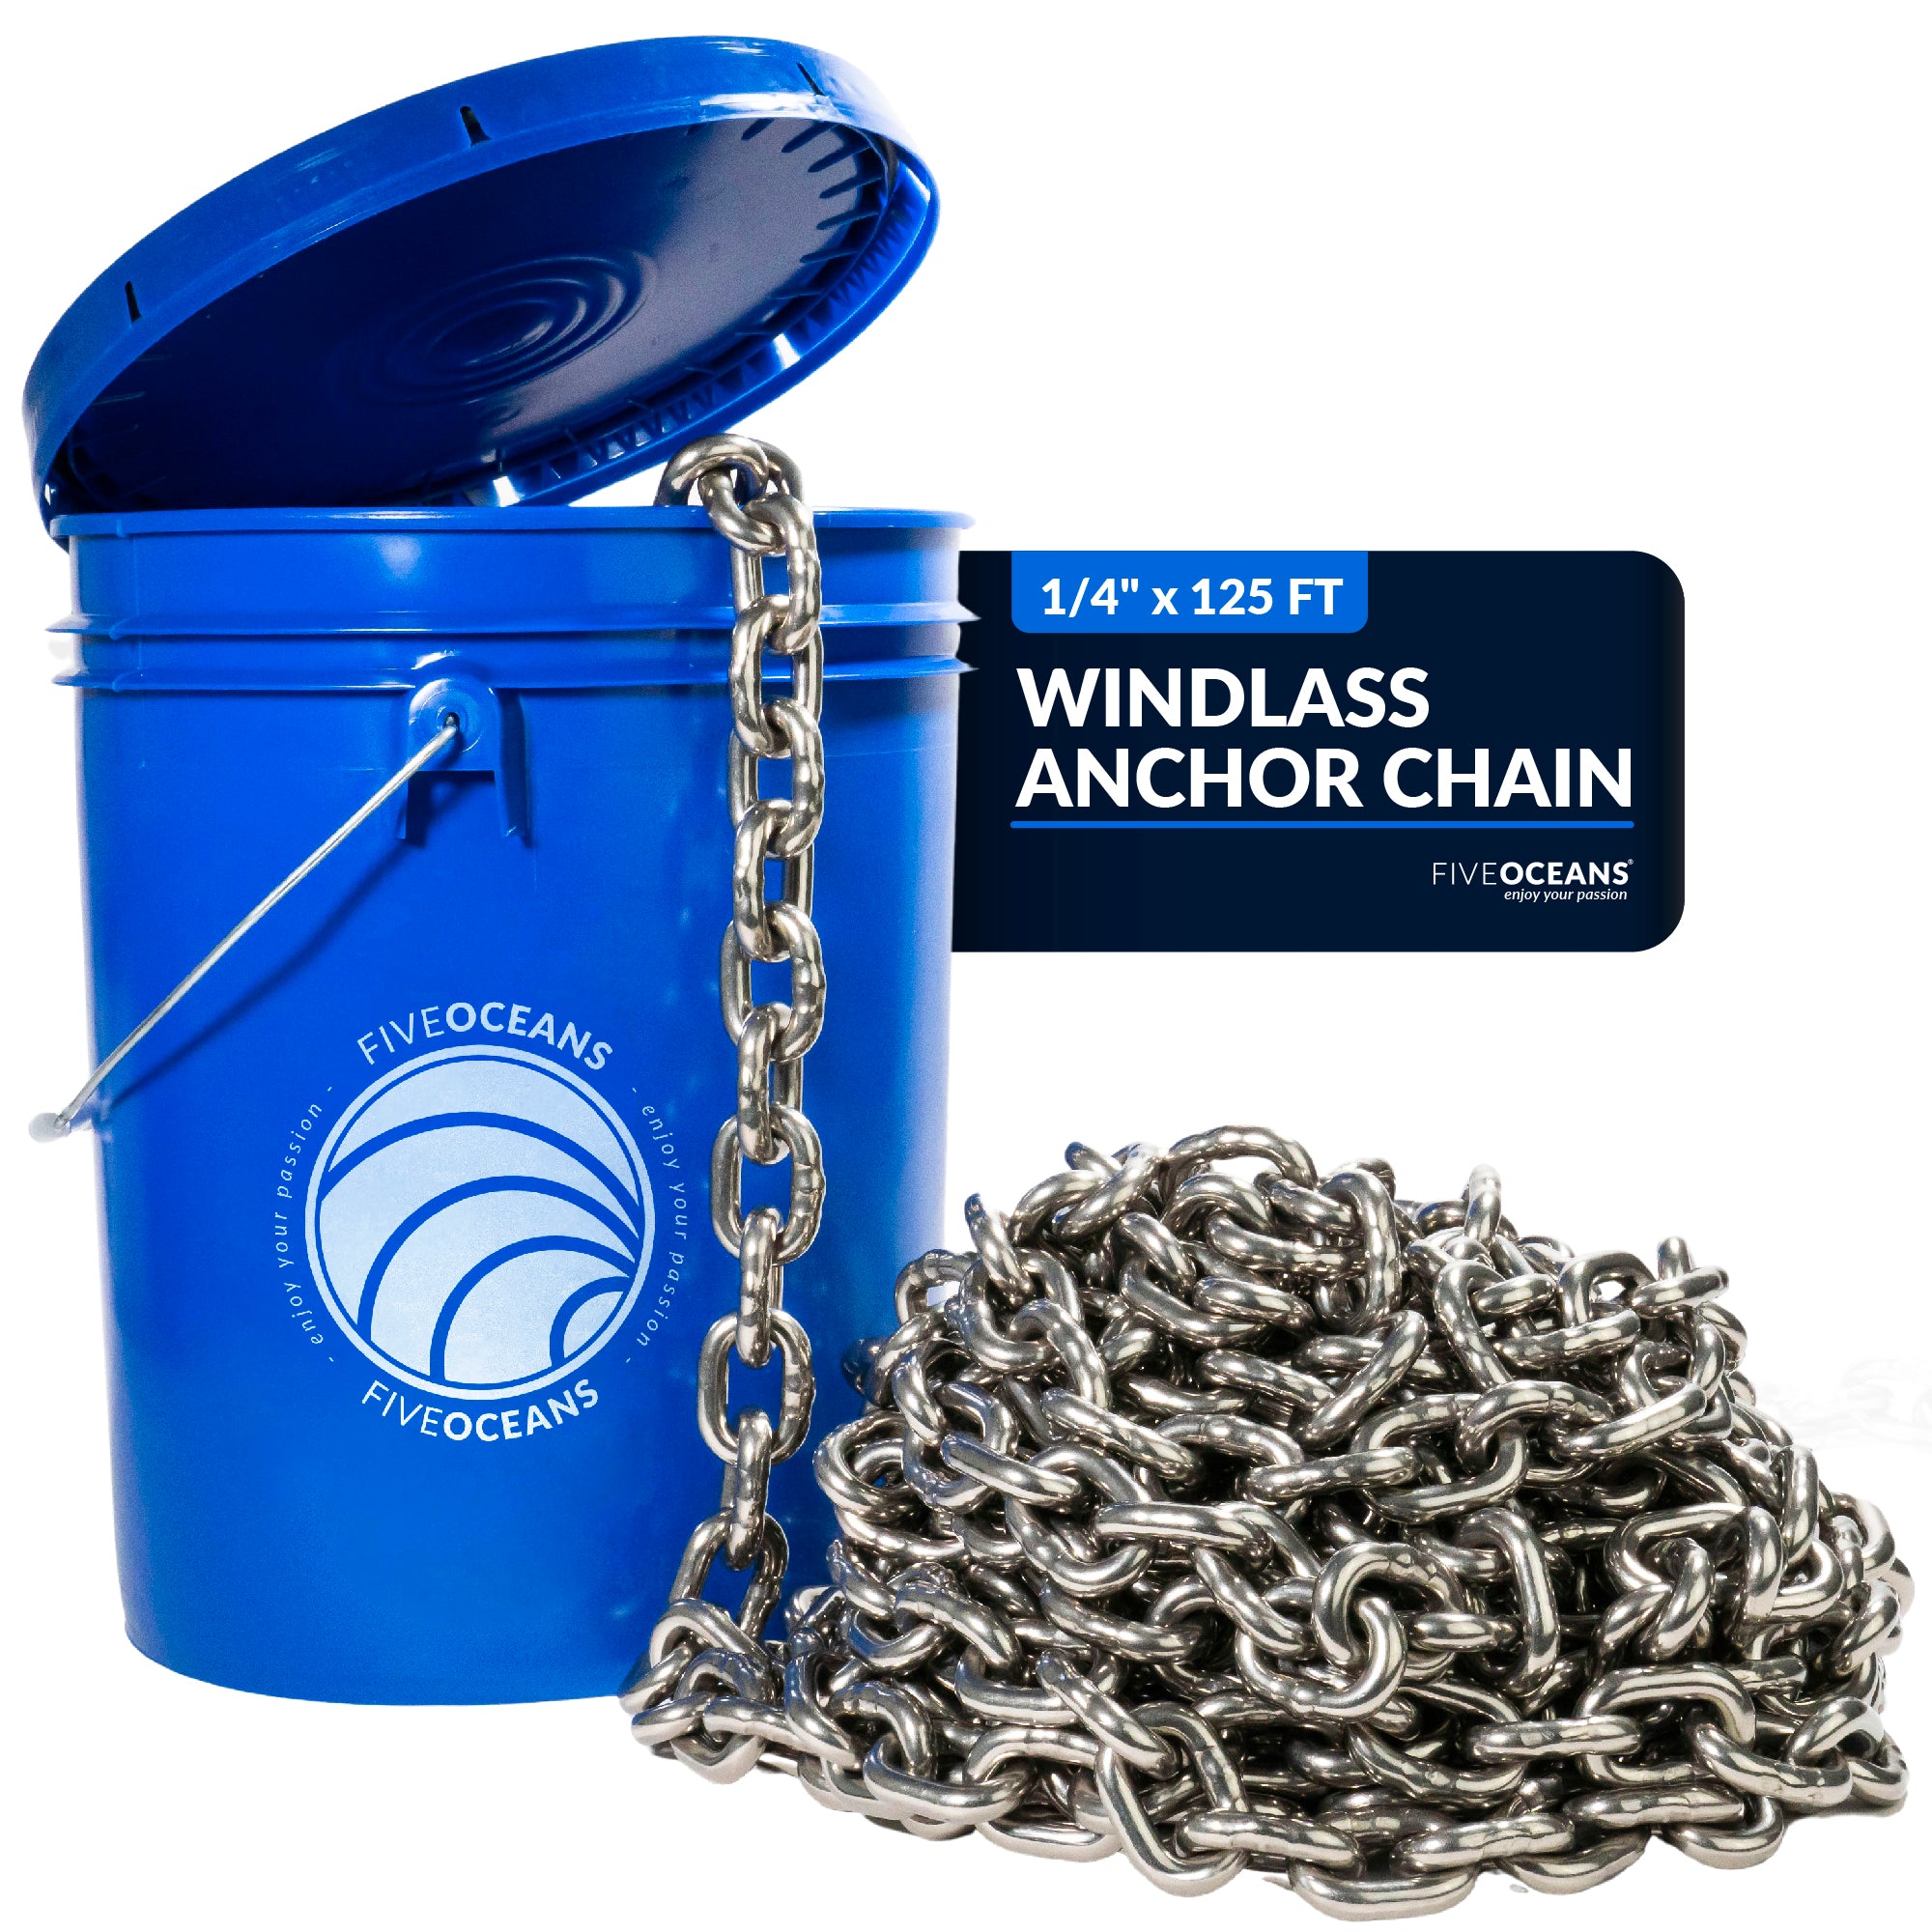 1/4" x 125' Boat Windlass Anchor Chain HT G4 Stainles Steel - FO4492-M125